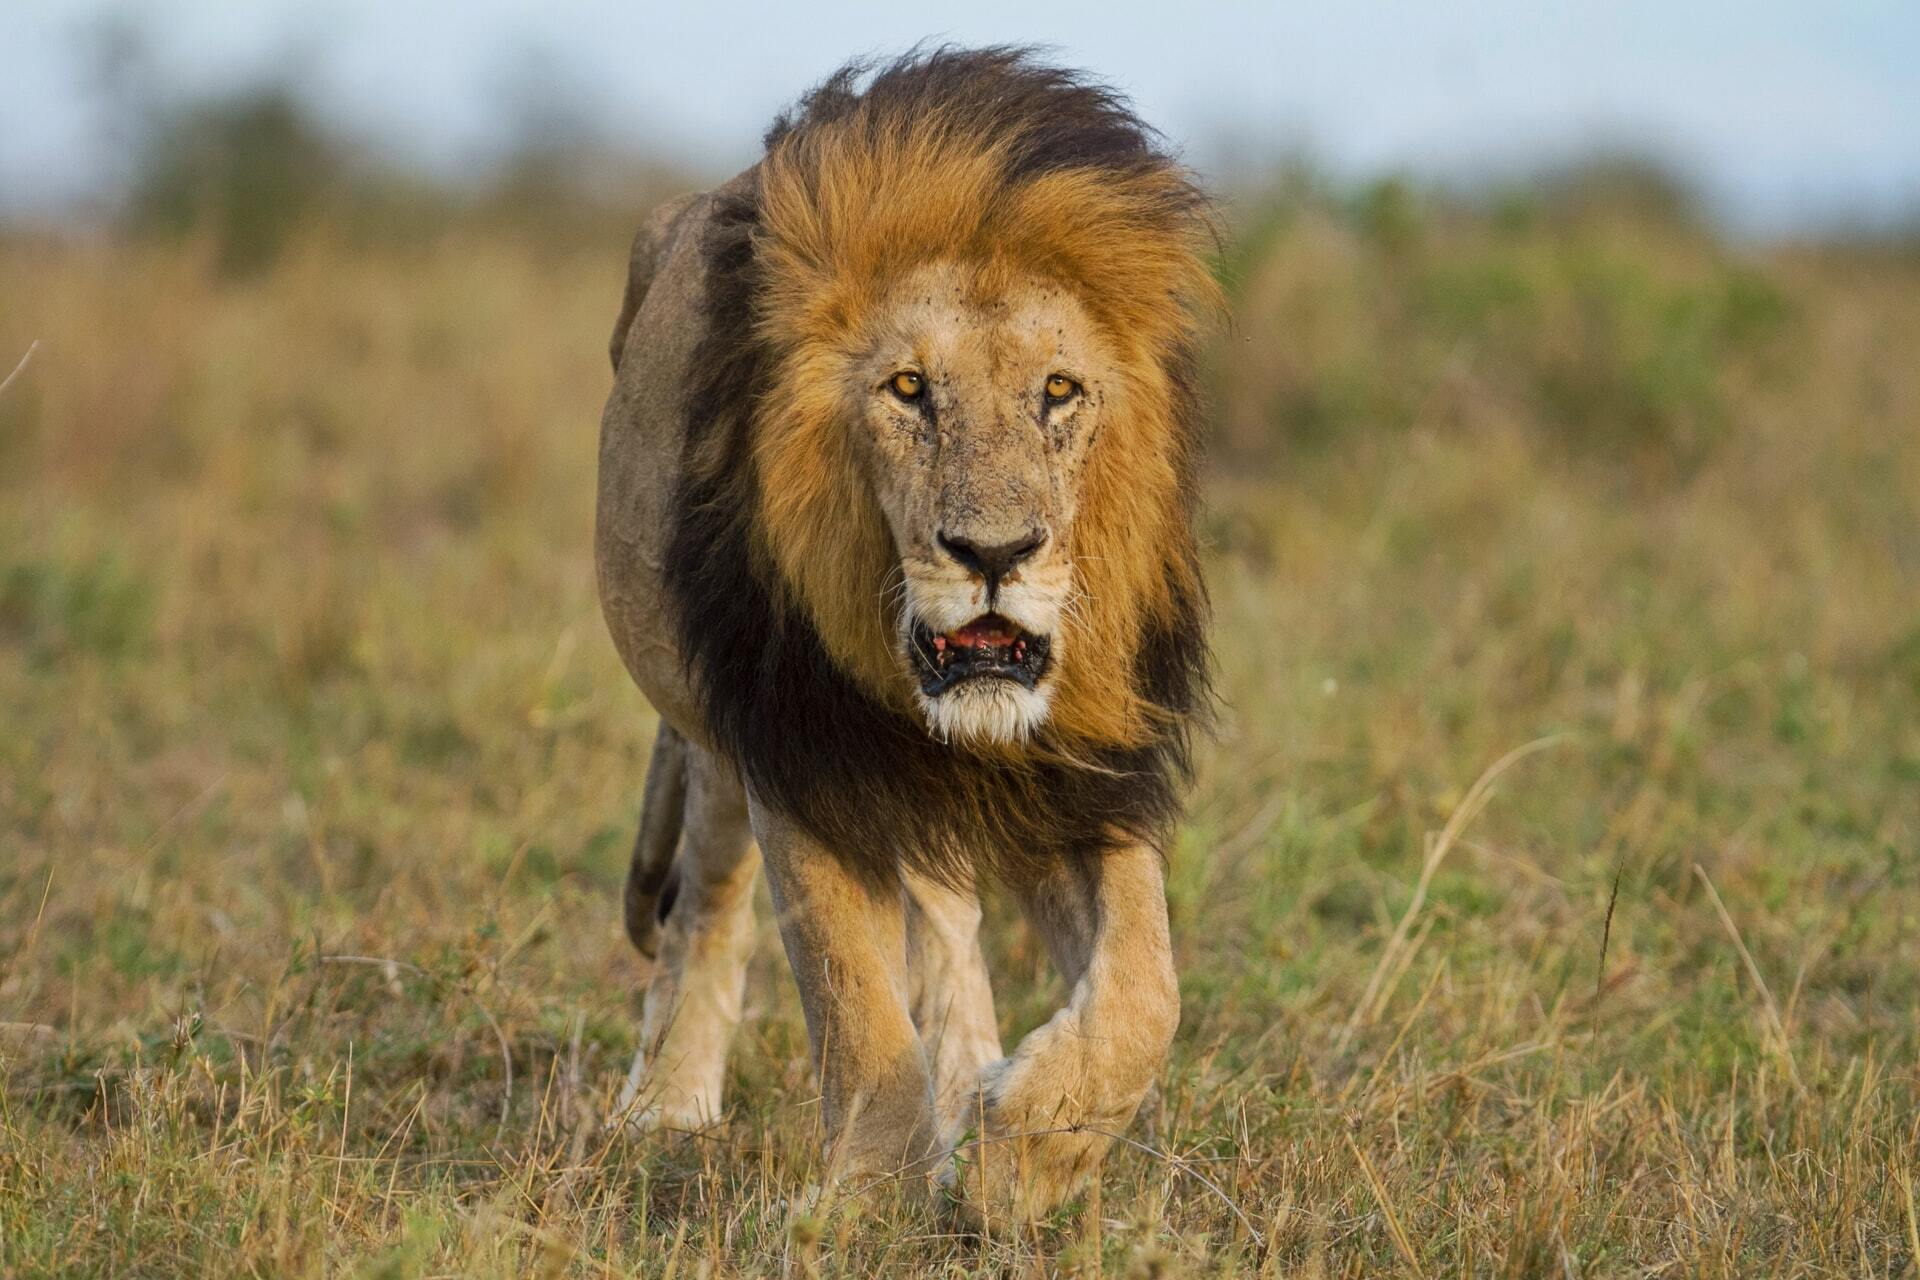 Tips for spotting Africa’s Big 5